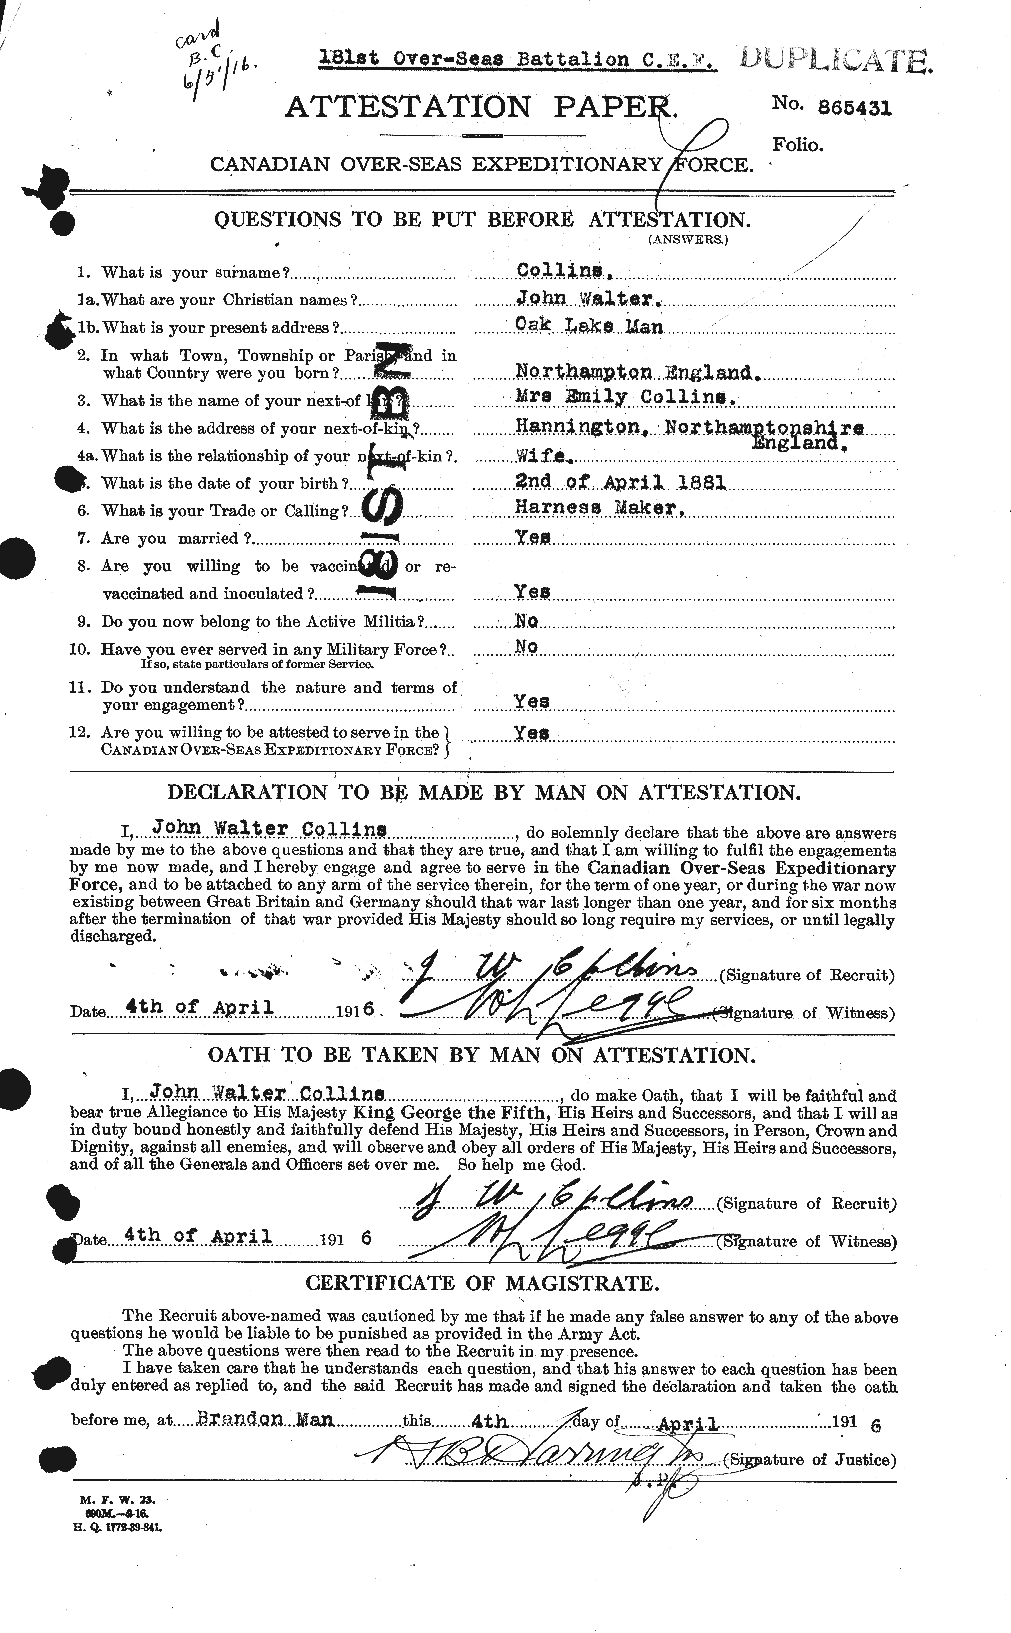 Personnel Records of the First World War - CEF 069533a